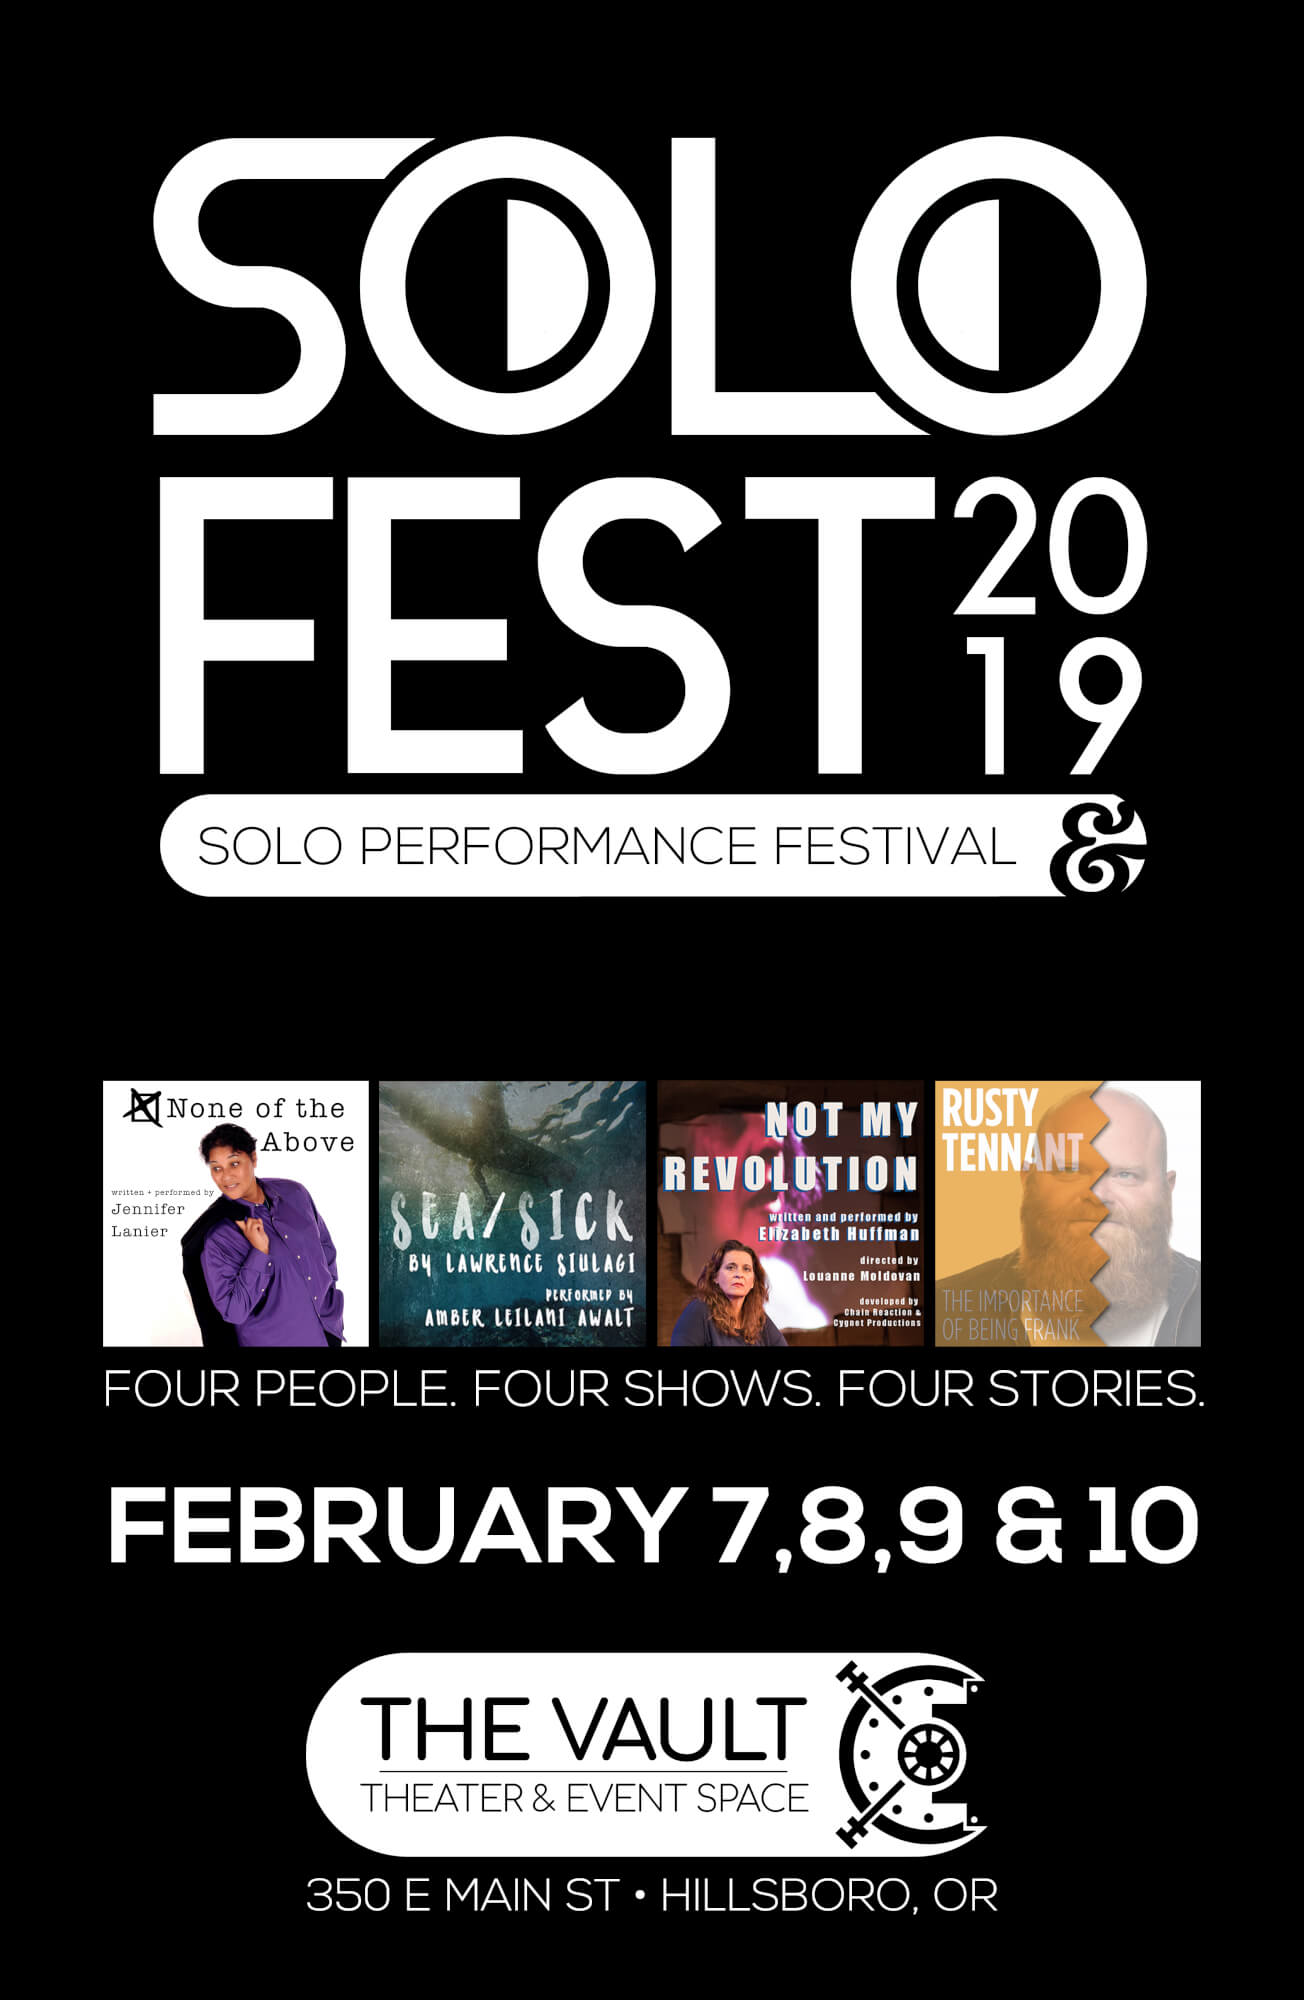 SOLO Fest 2019 Bag&Baggage Productions